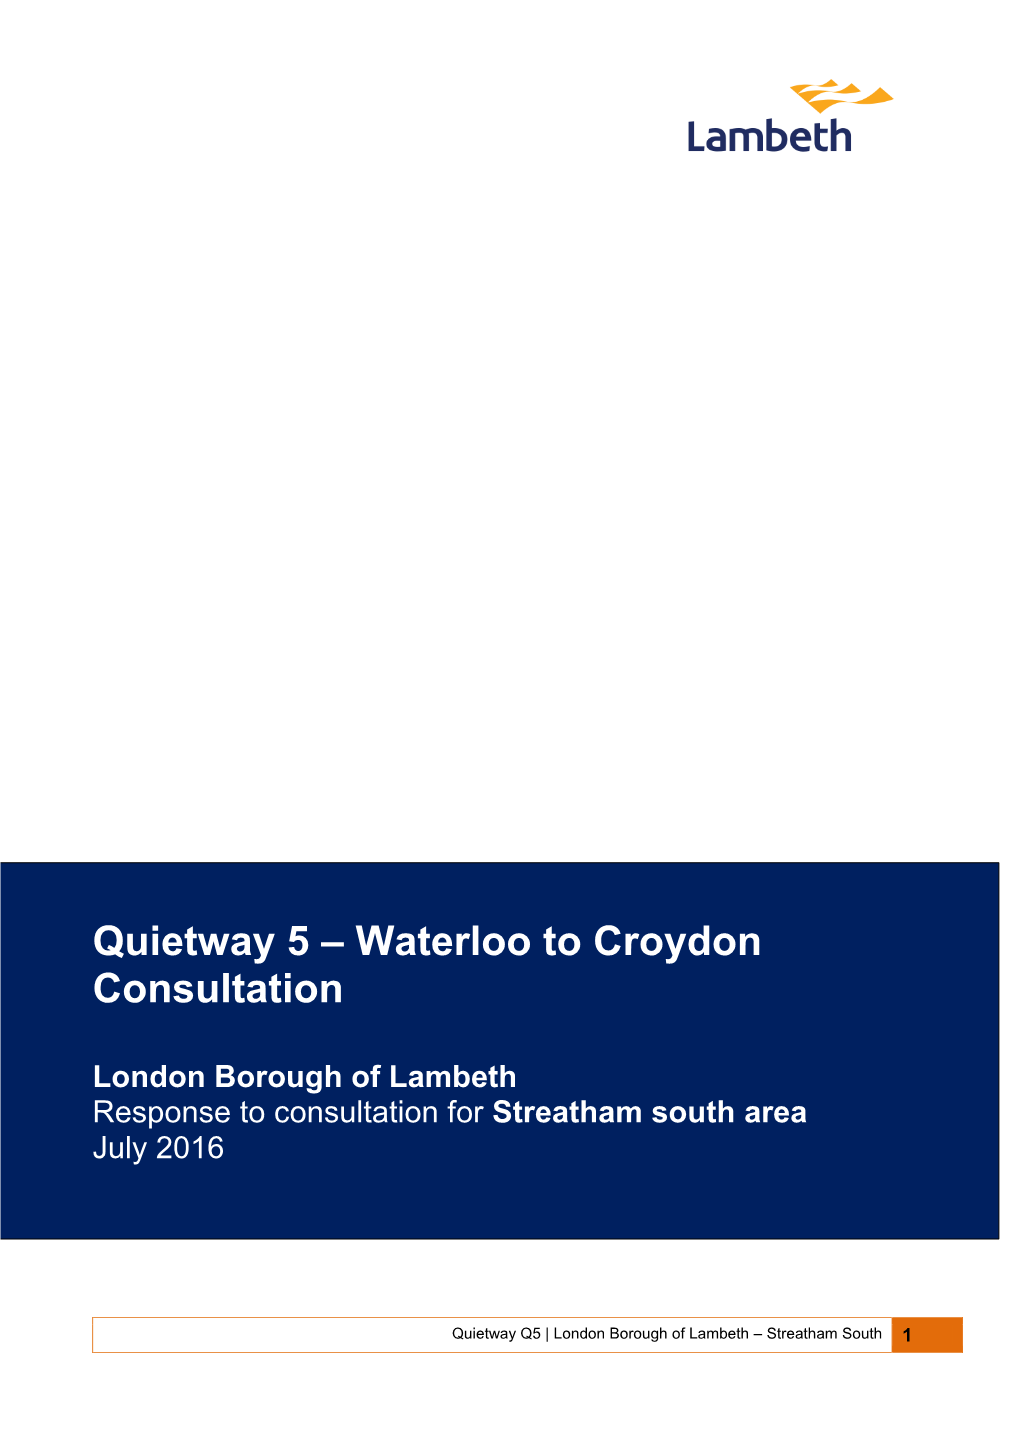 Streatham South Area Onsultation – 4 Schemes – 8 Sep to 4 Oct 2015 July 2016 Response to Consultation for Streatham South Area March 2016 (V3 14.03.16)